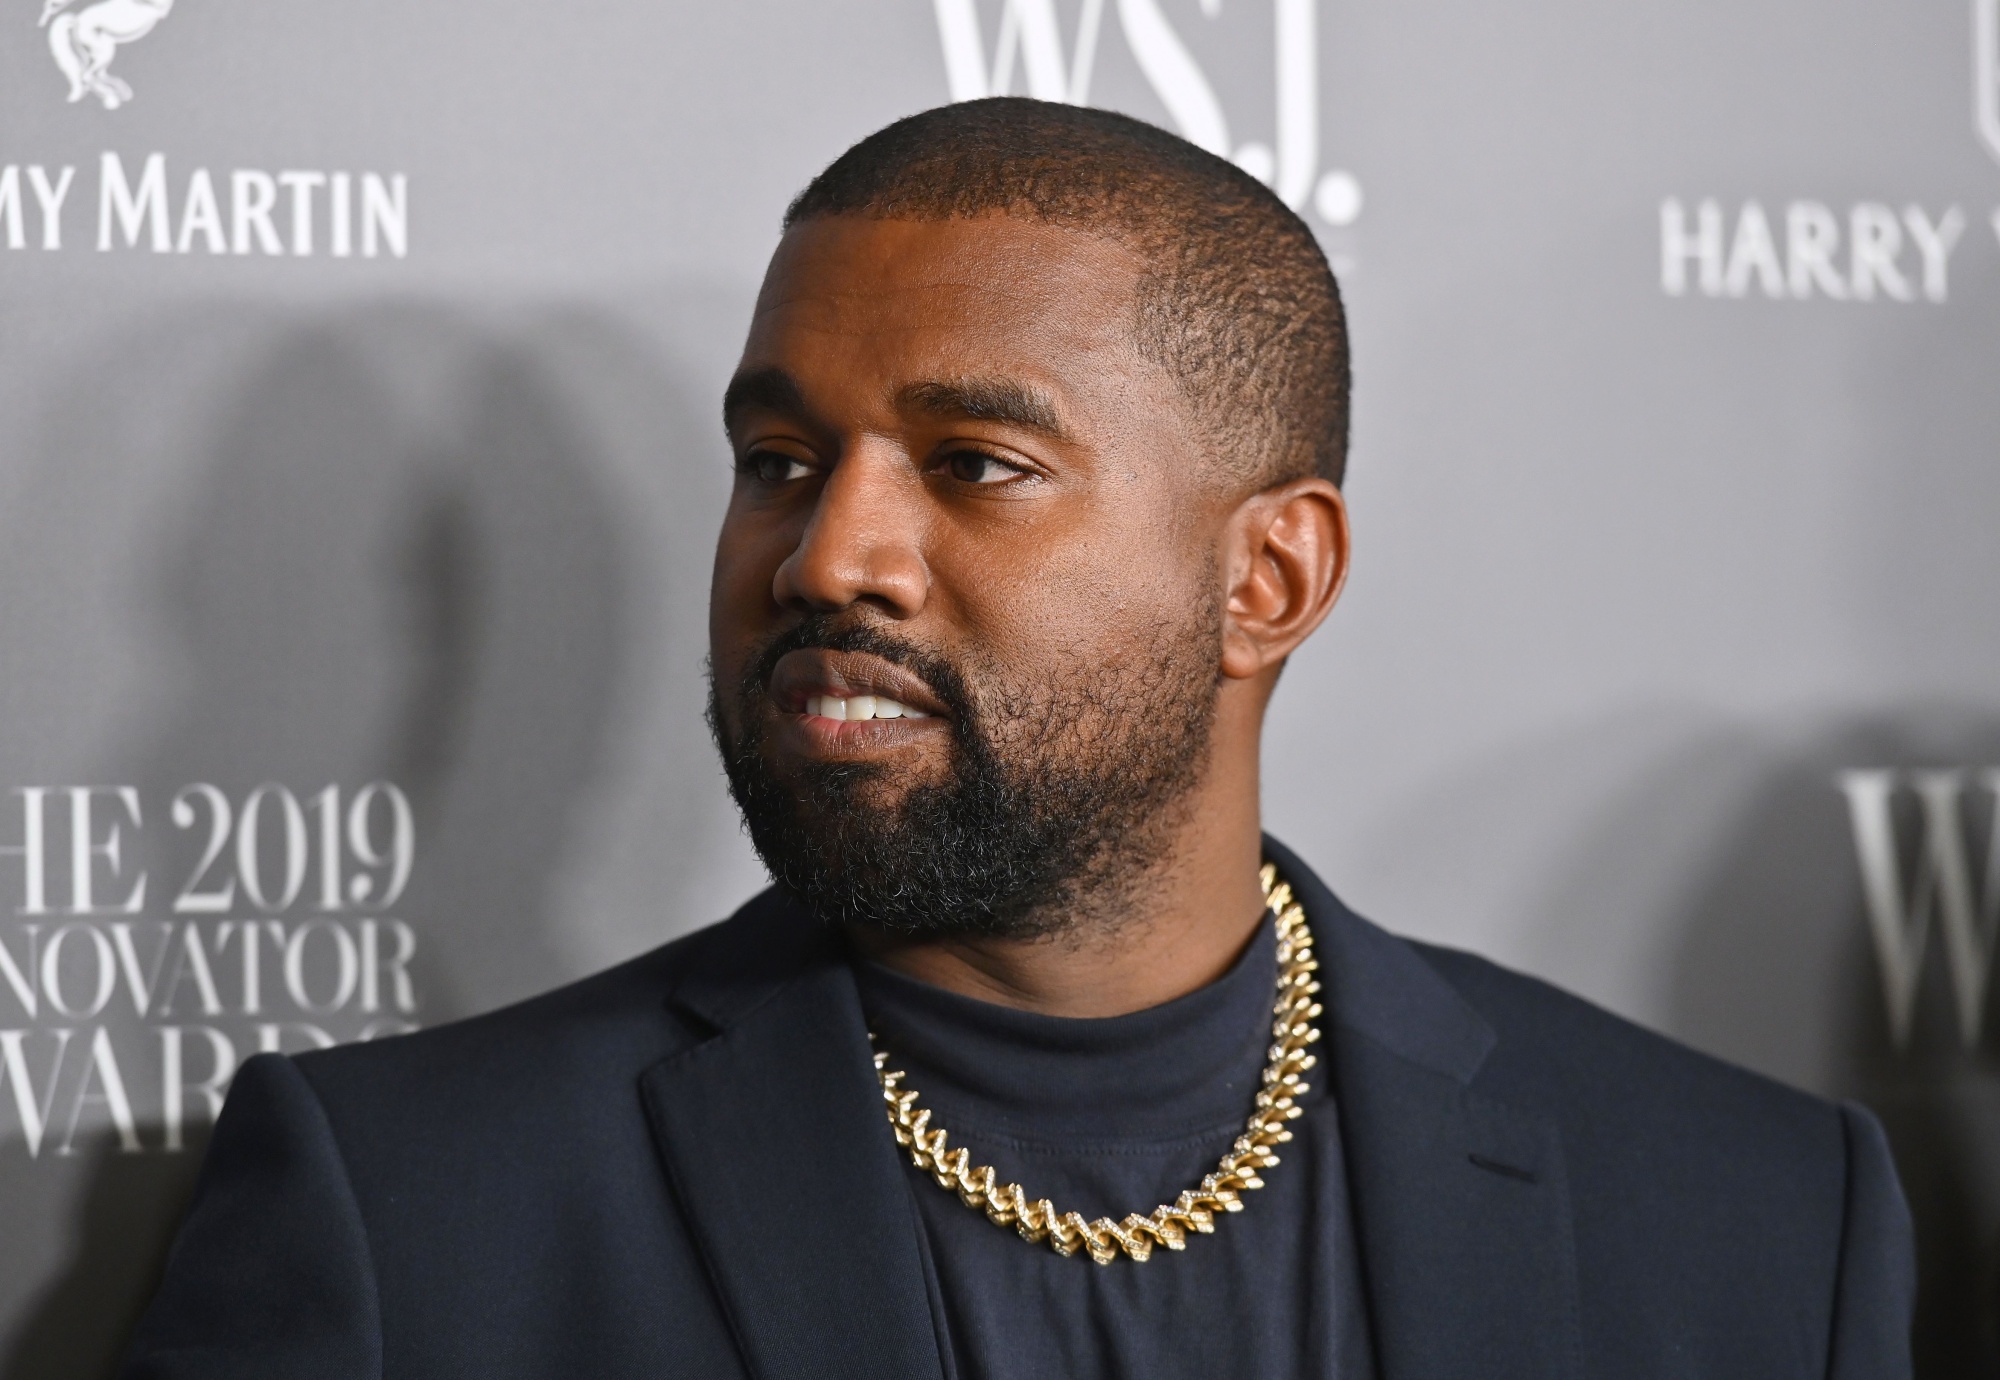 Kanye West calls out Nike exec: 'He just lost culture